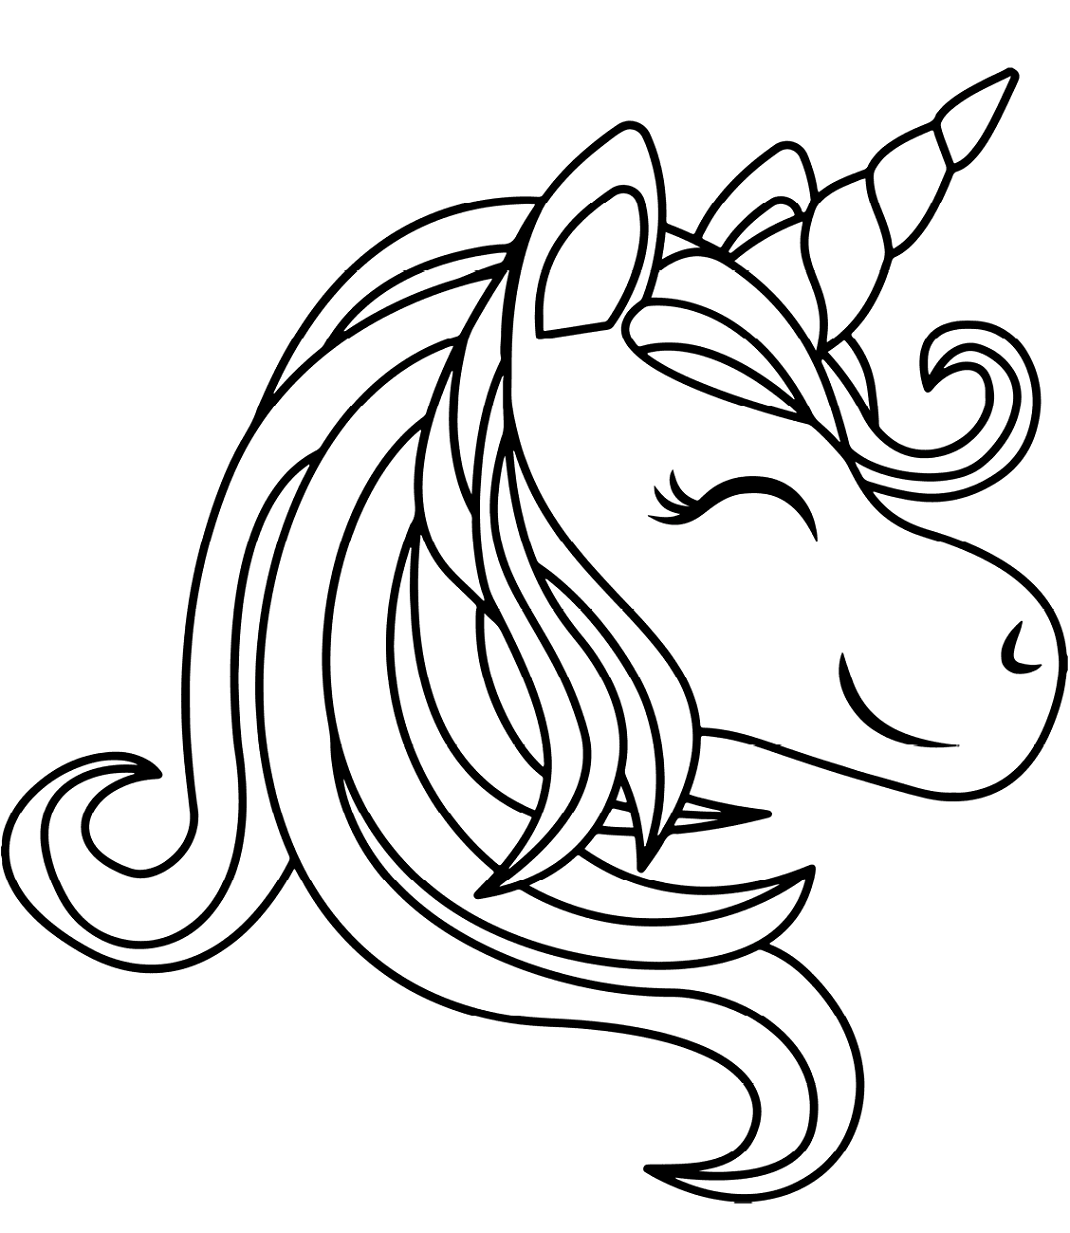 Unicorn Head Smiling Coloring Page   Free Printable Coloring Pages ...